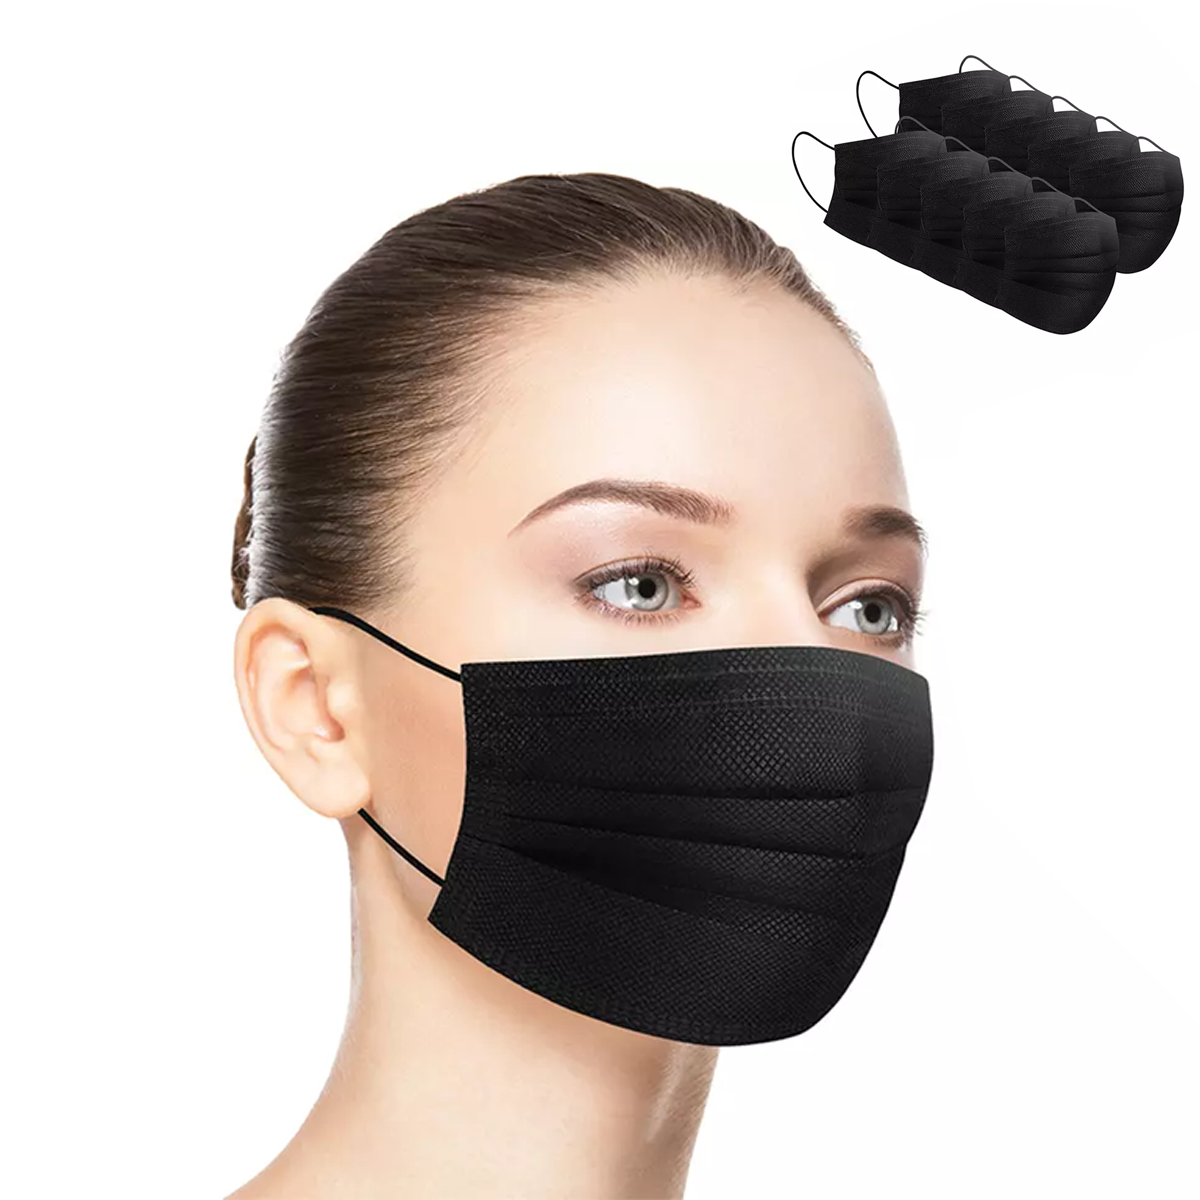 Disposable 3-Ply Black Face Masks (50-Pack)